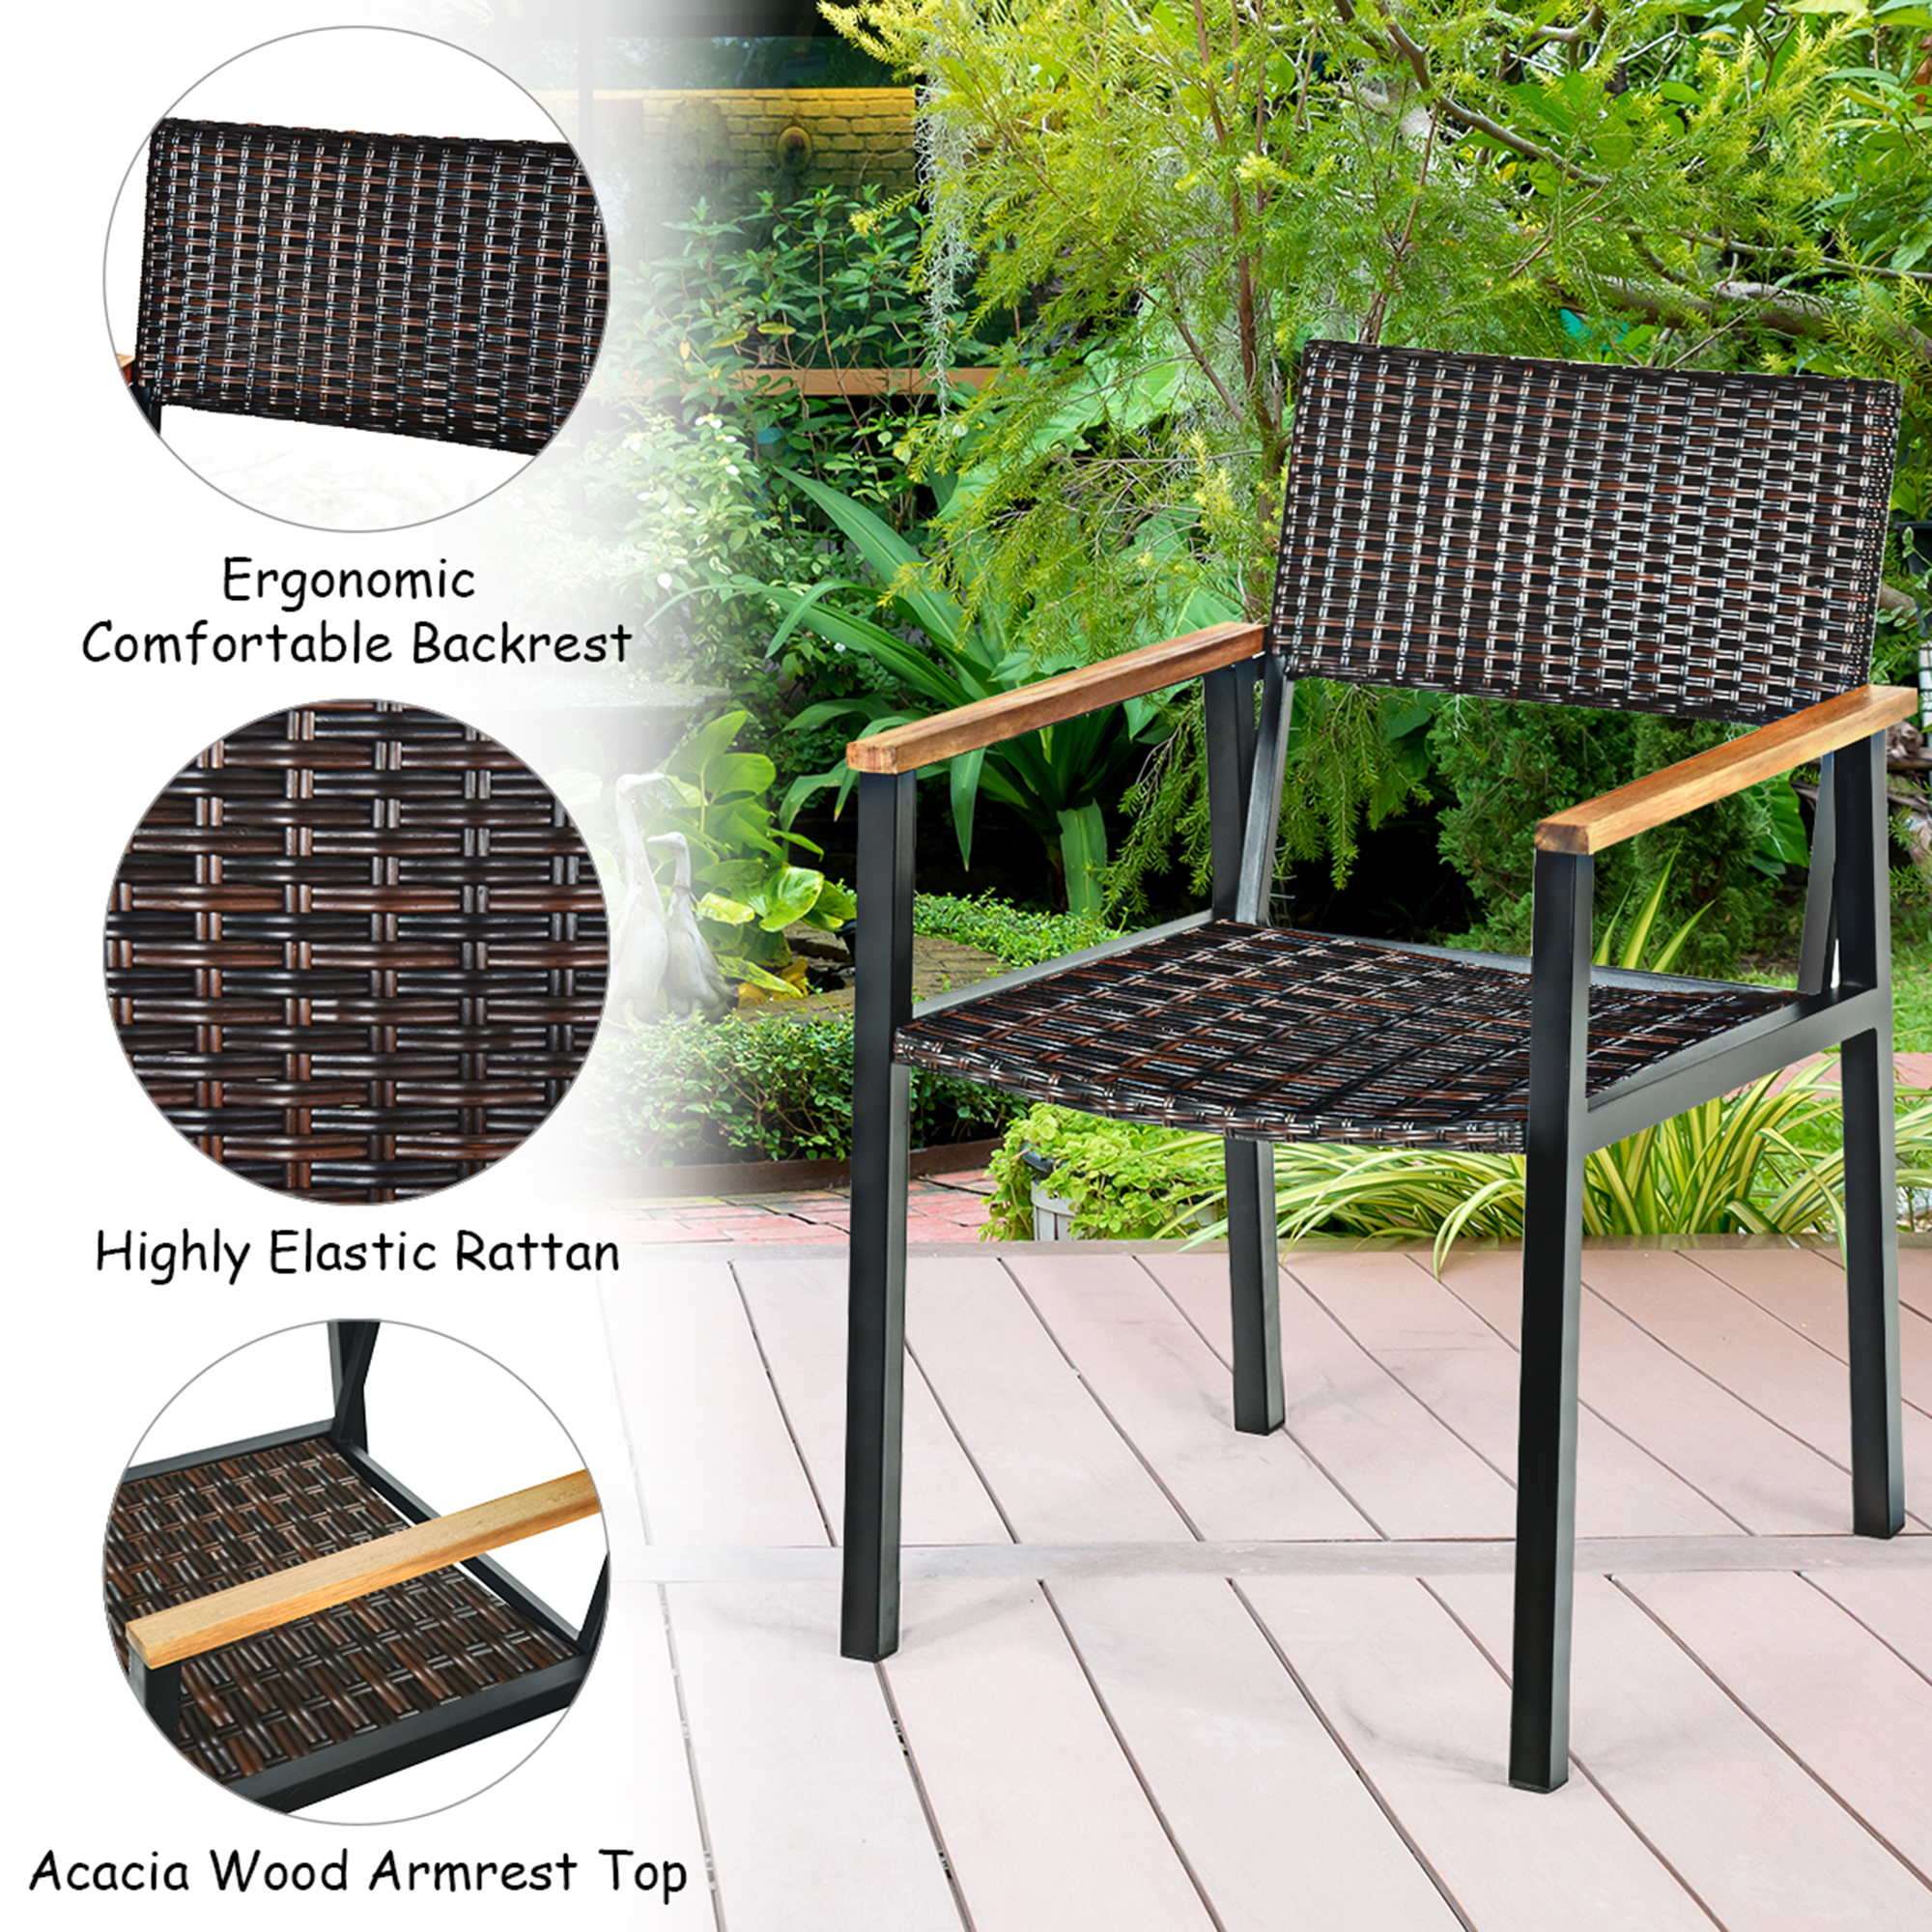 Costway 7PCS Patio Rattan Patented Dining Chair Table Set Solid Wood Frame Umbrella Hole